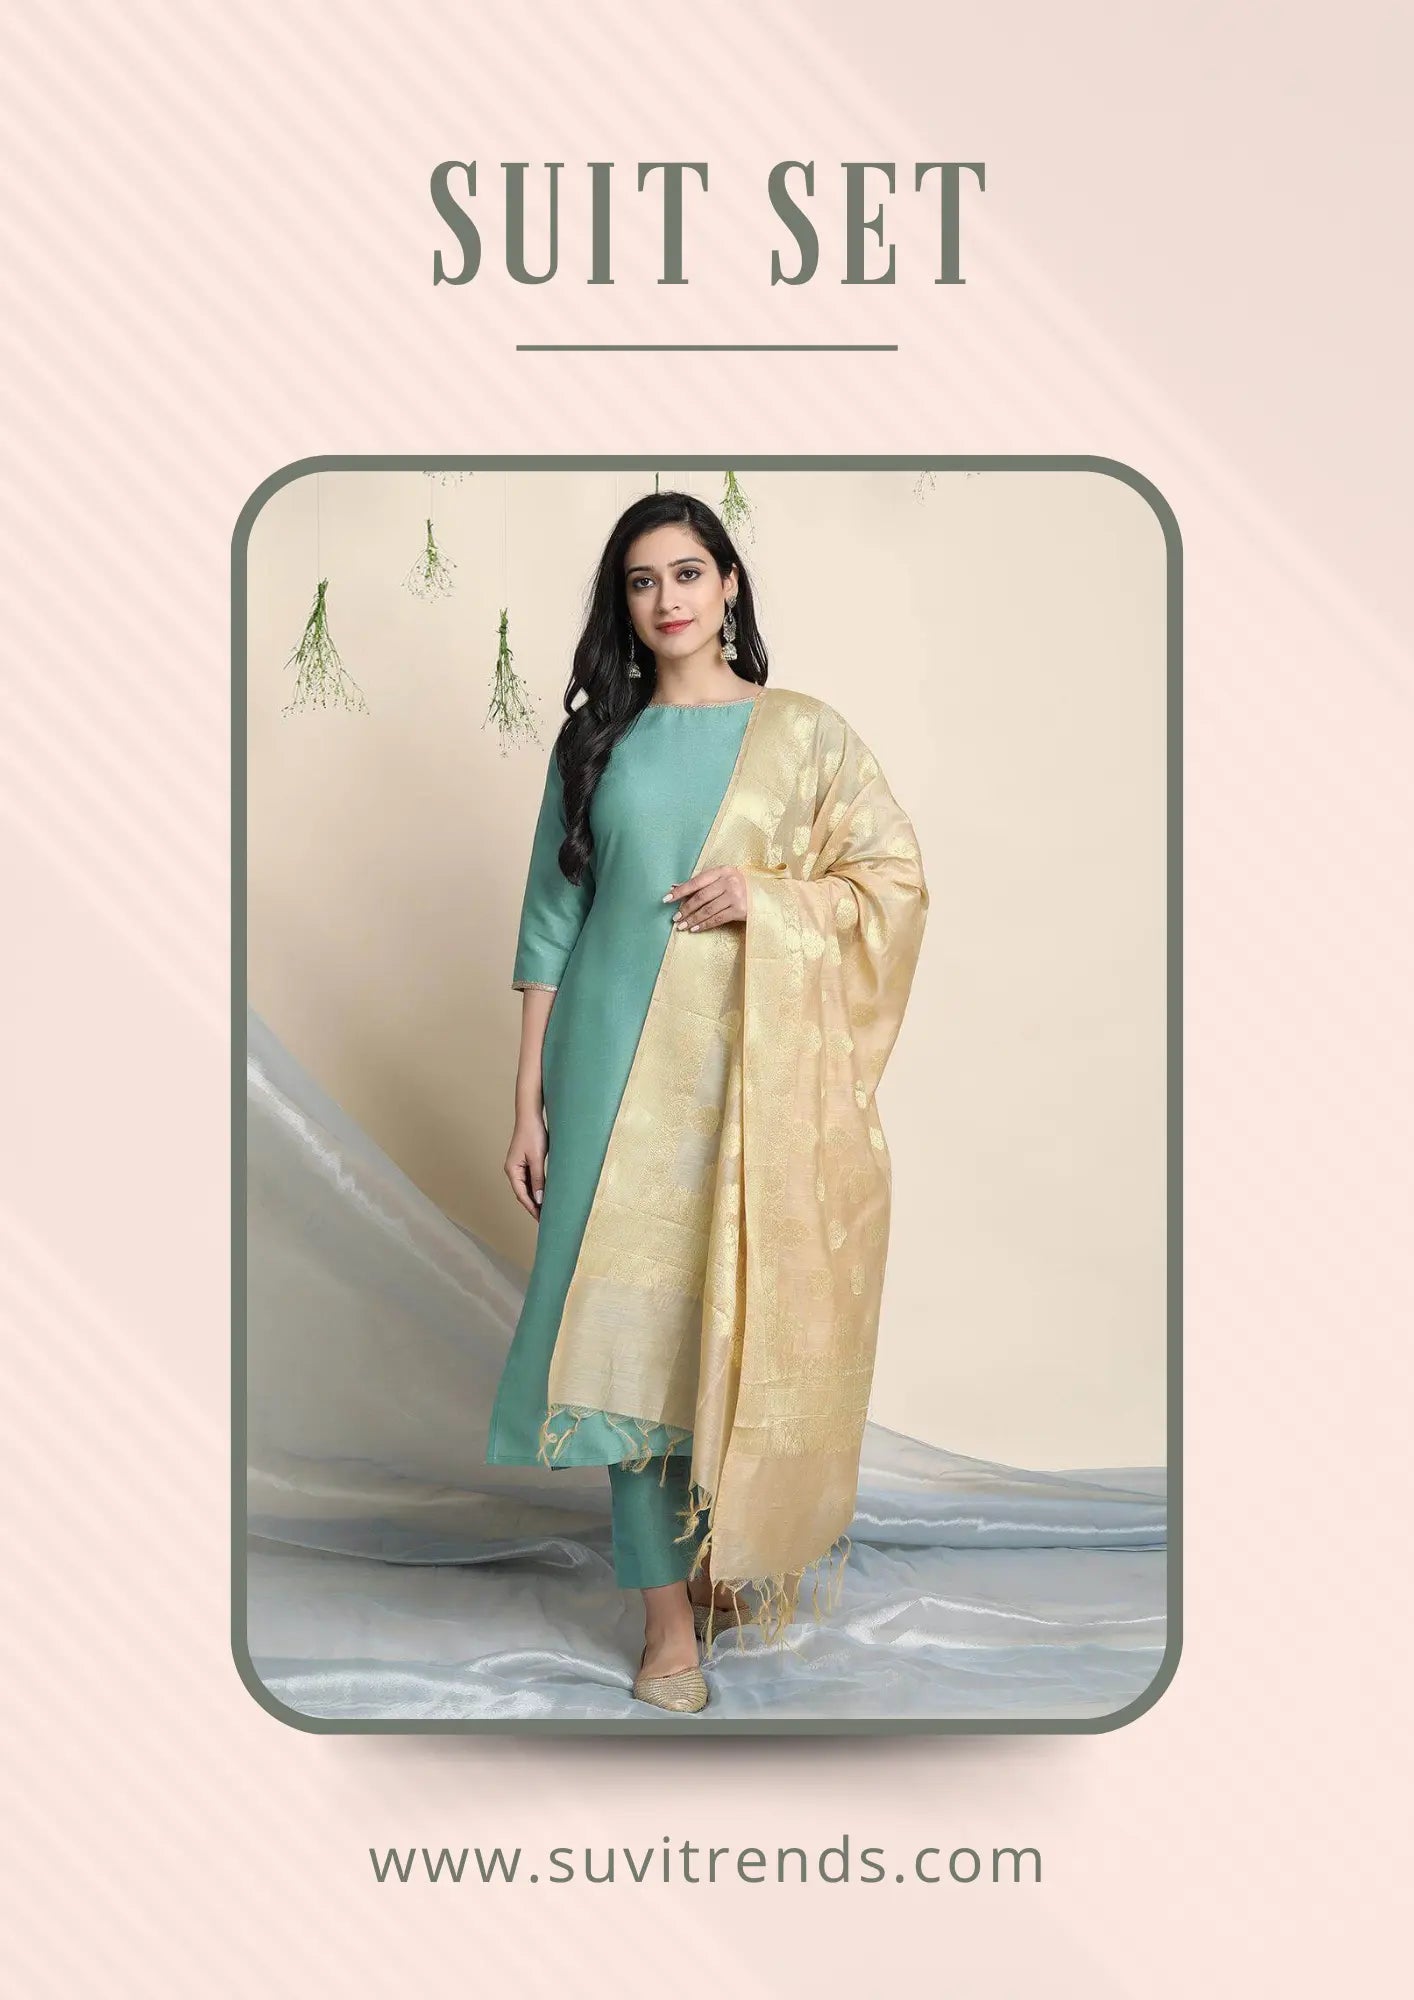 Elevate your ethnic wardrobe with our Suit Set Collection. Crafted with premium fabrics and impeccable finishing, this collection from Suvi Trends offers sophisticated, stylish pieces for women. Buy now!